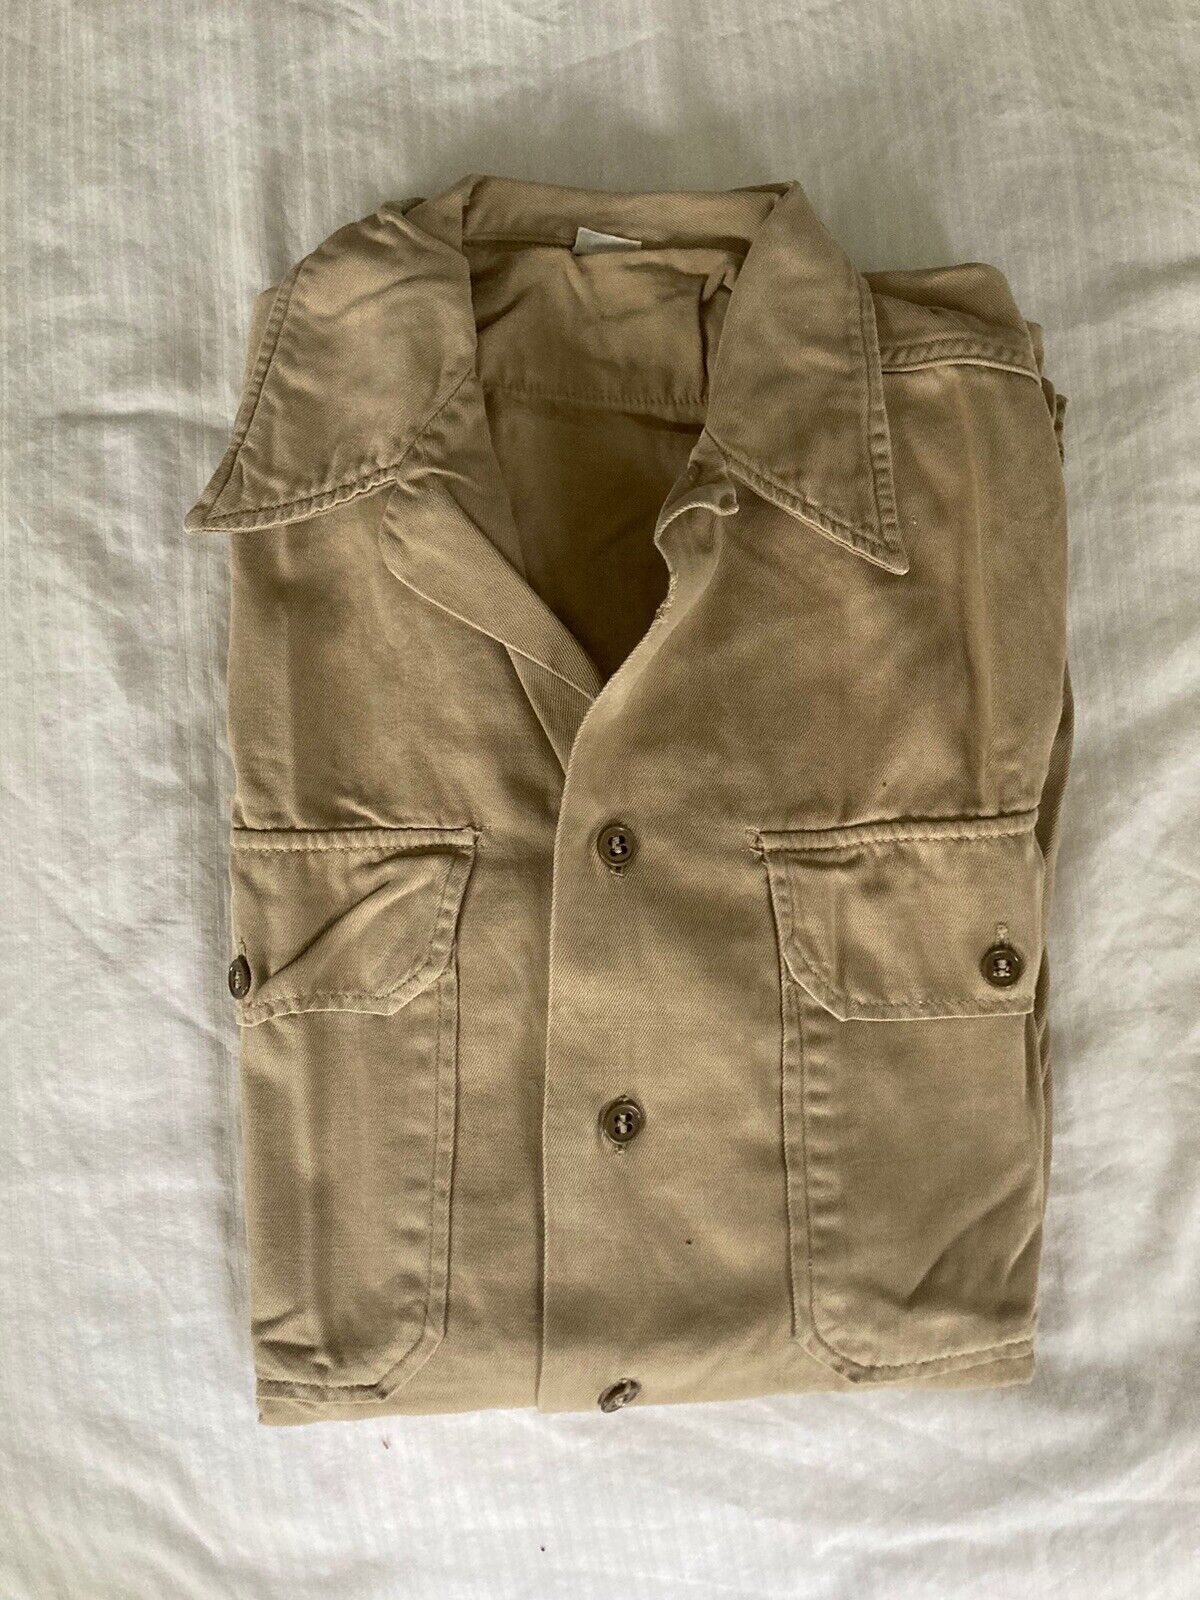 Vintage WWII US Army Seargeant Cotton Khaki Twill Summer Shirt 15 x 32